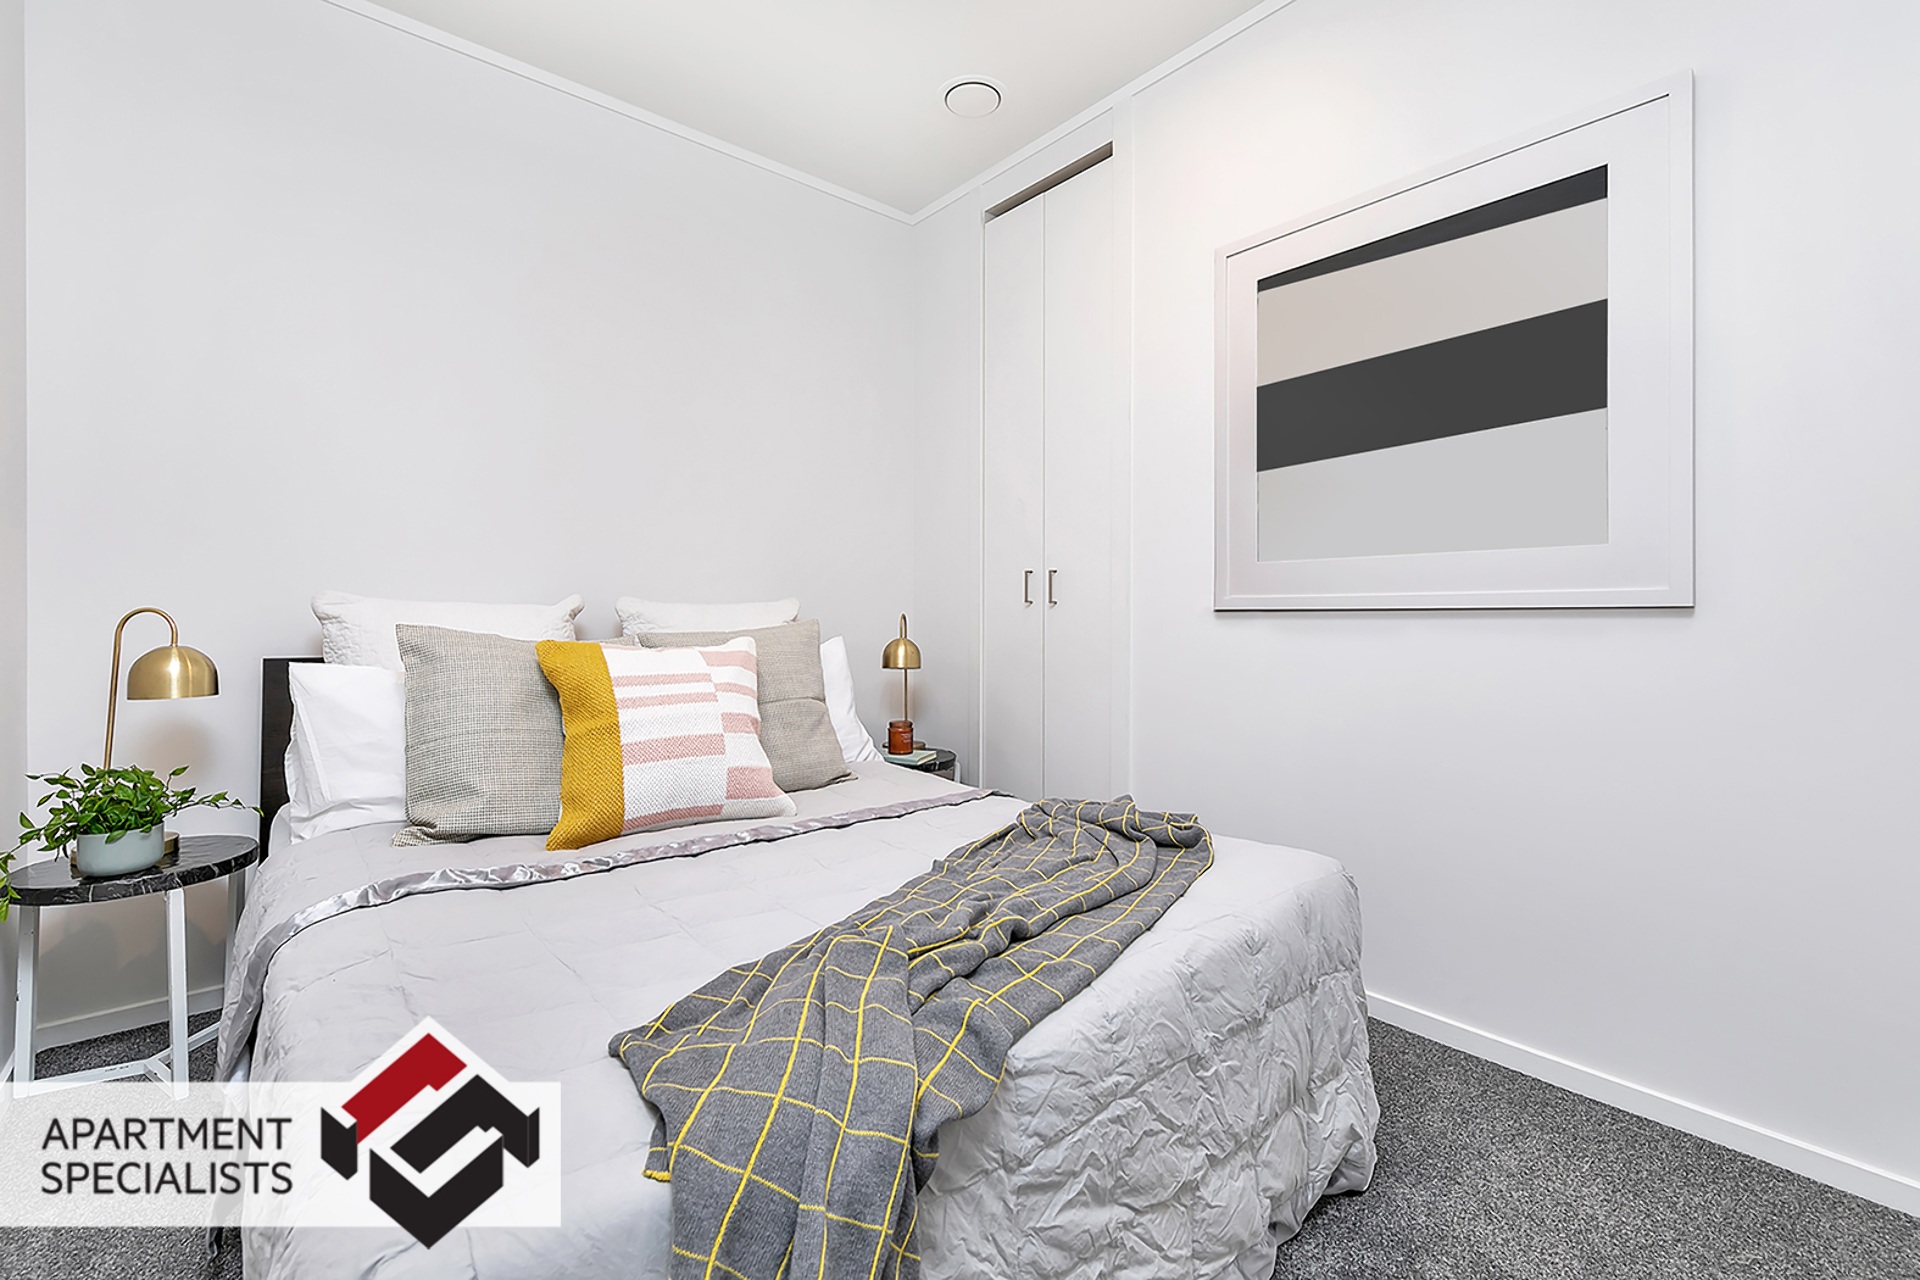 6 | 430 Queen Street, City Centre | Apartment Specialists